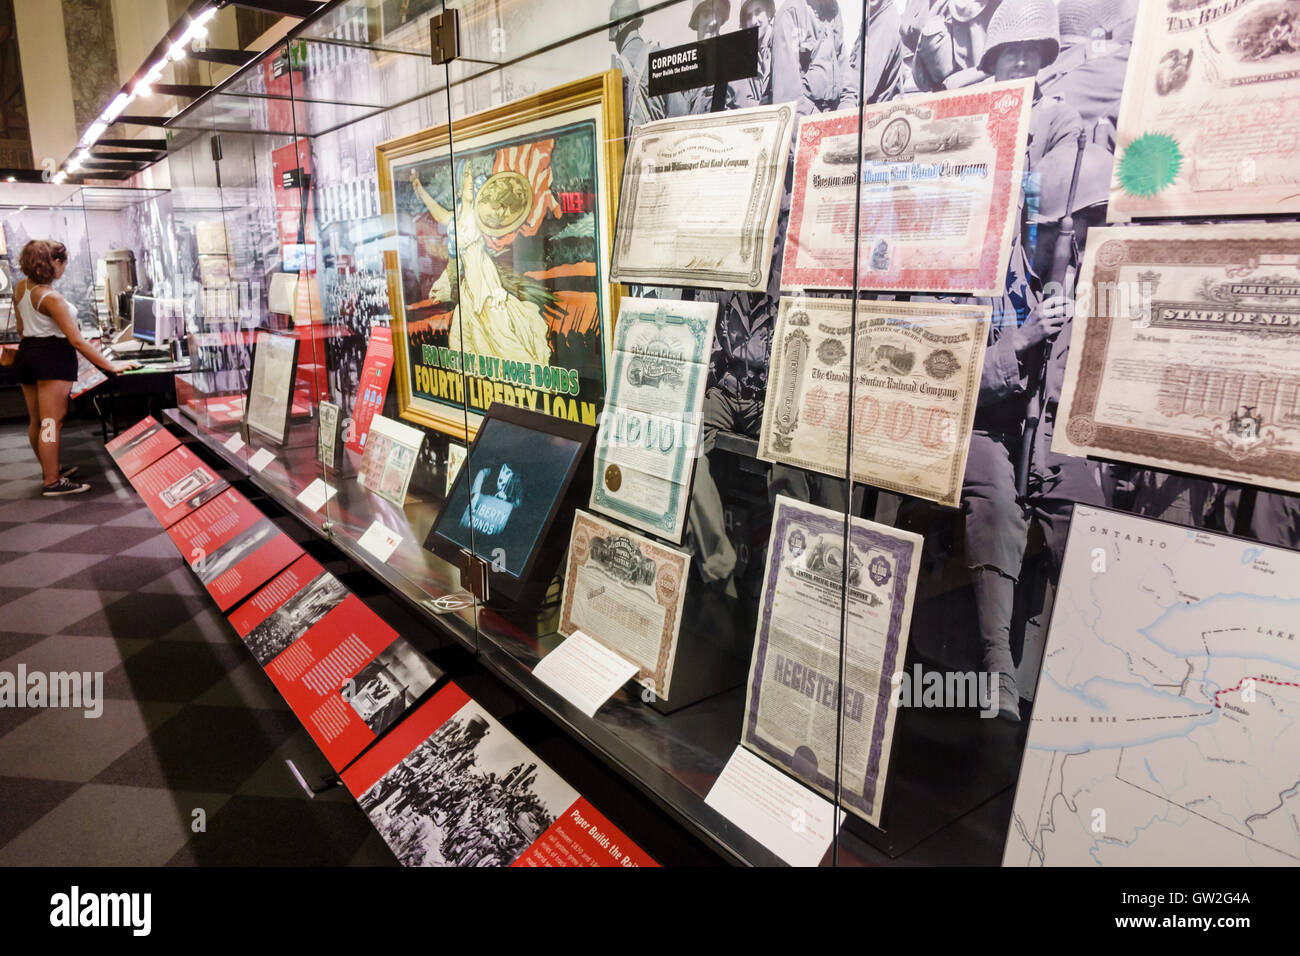 New York City,NY NYC Lower Manhattan,Financial District,Wall Street,Museum of American Finance,American Financial History,Exhibition collectio Foto Stock